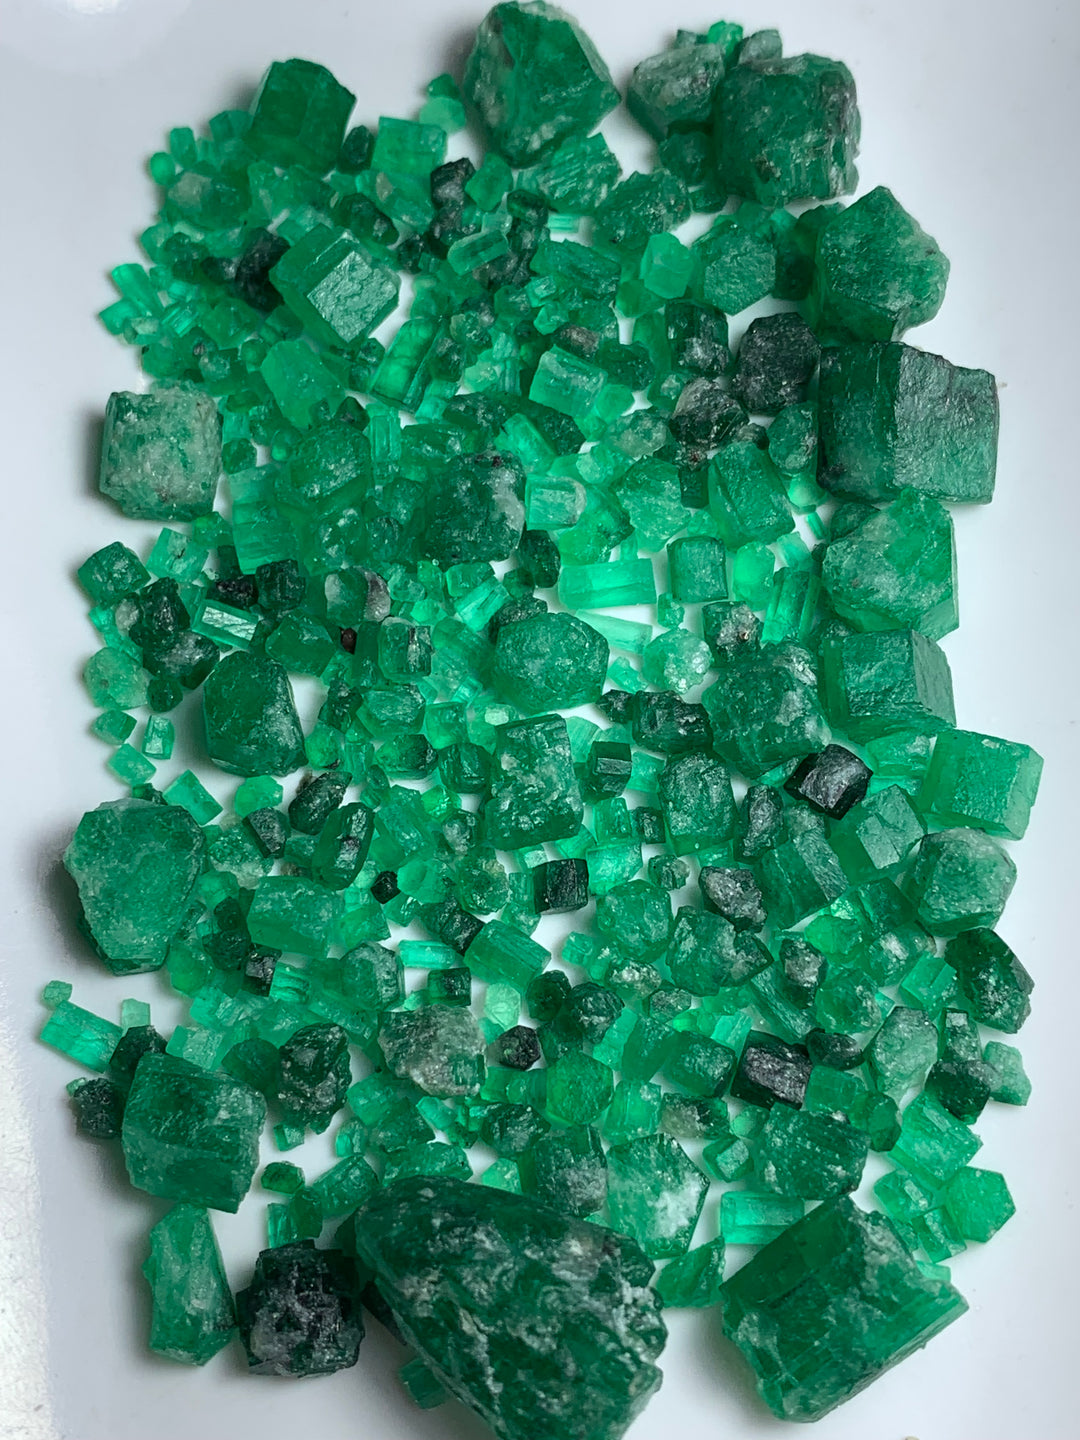 Exquisite 204.75 Carats Facet Rough Emerald From Swat